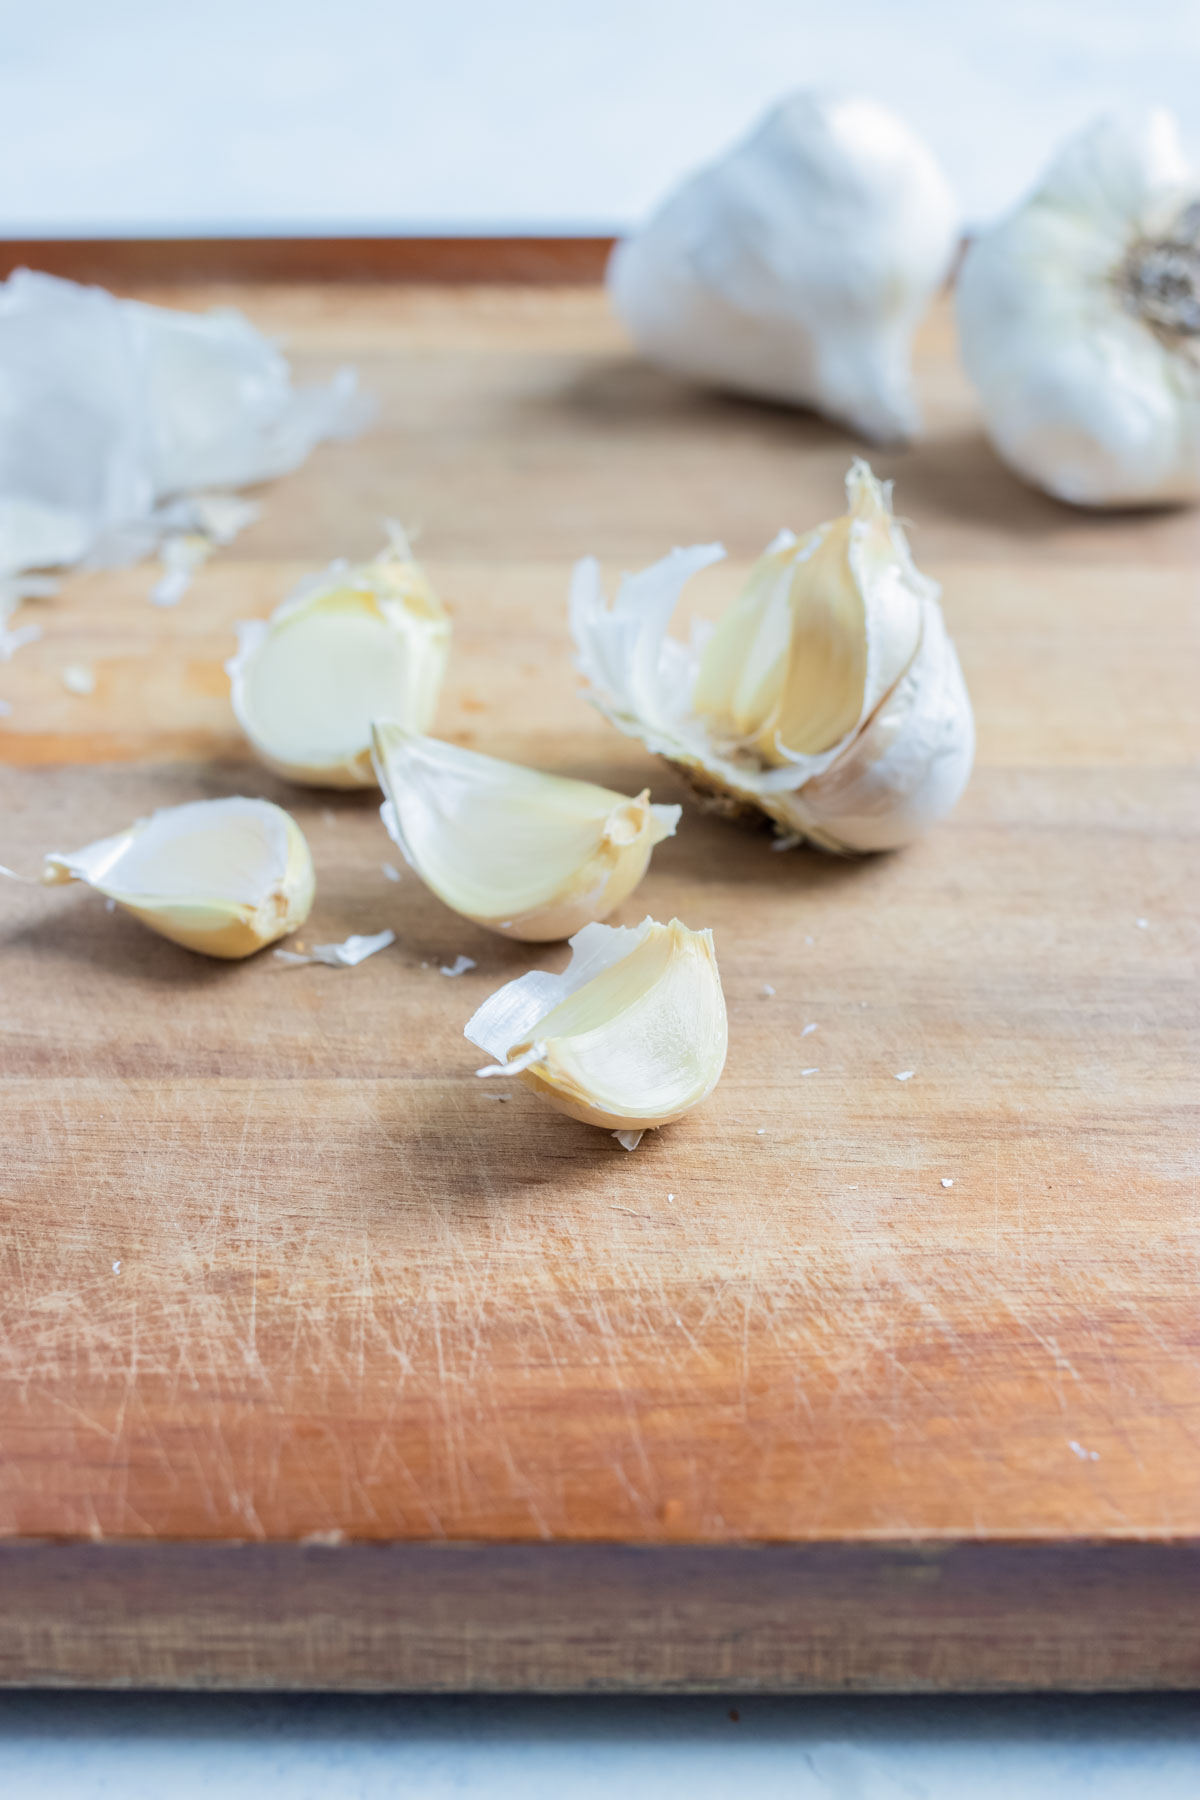 Multiple garlic cloves are shown on the counter.